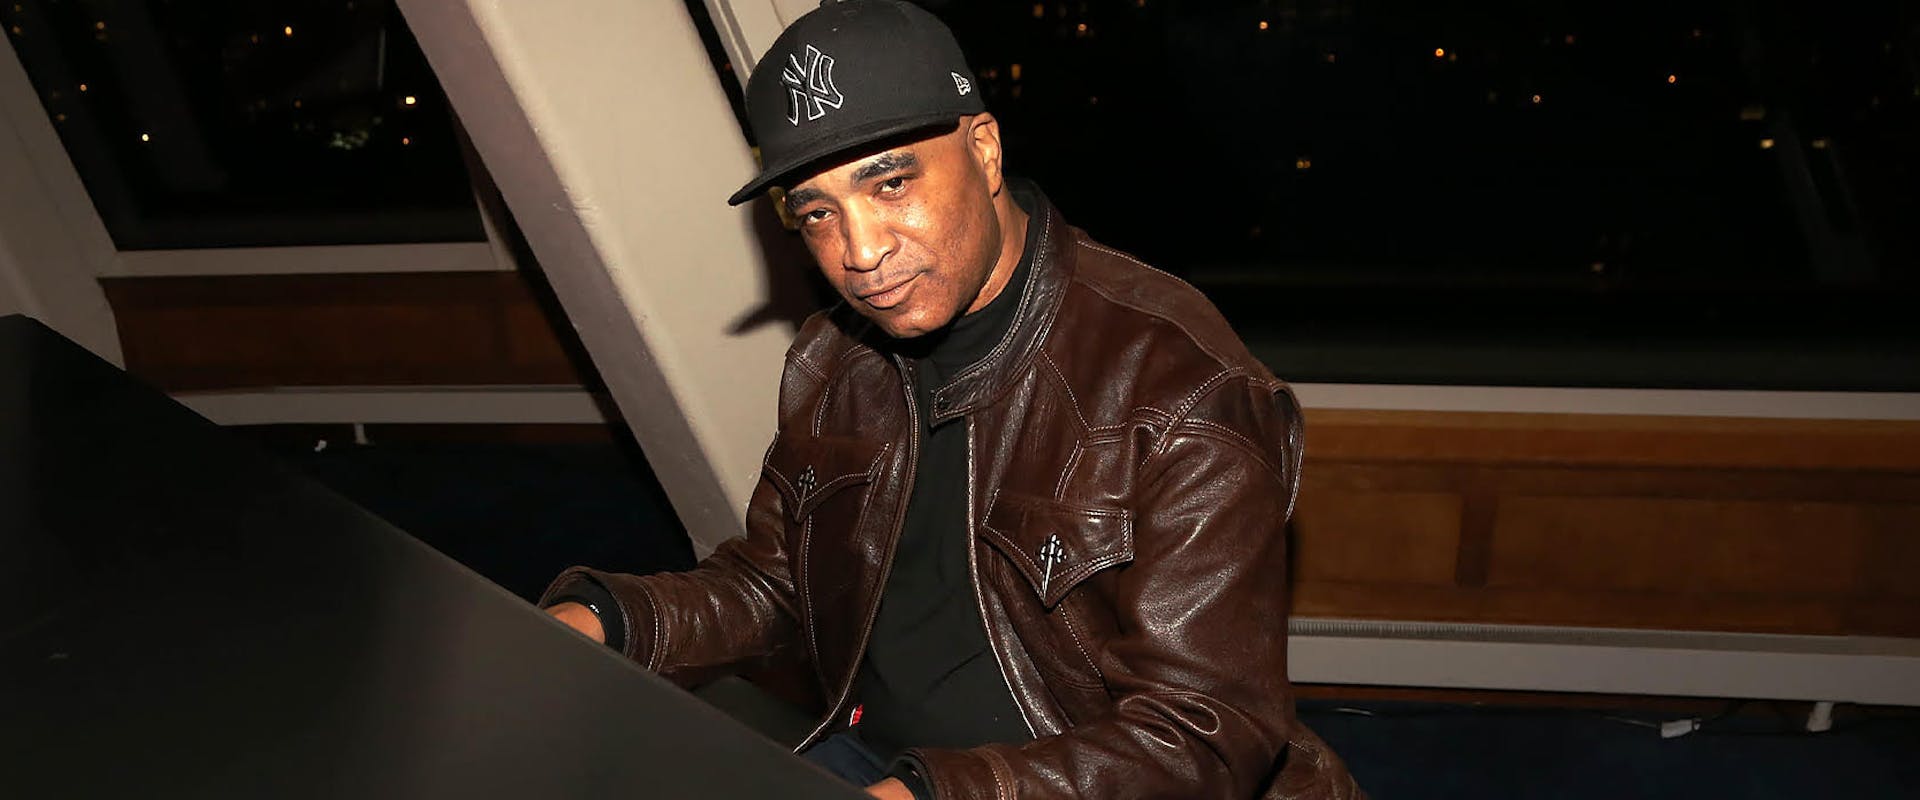 Marley Marl attends the 2015 Hip Hop Education Center's Extra Credit Awards at NYU - Kimmel Center on November 11, 2015, in New York City.